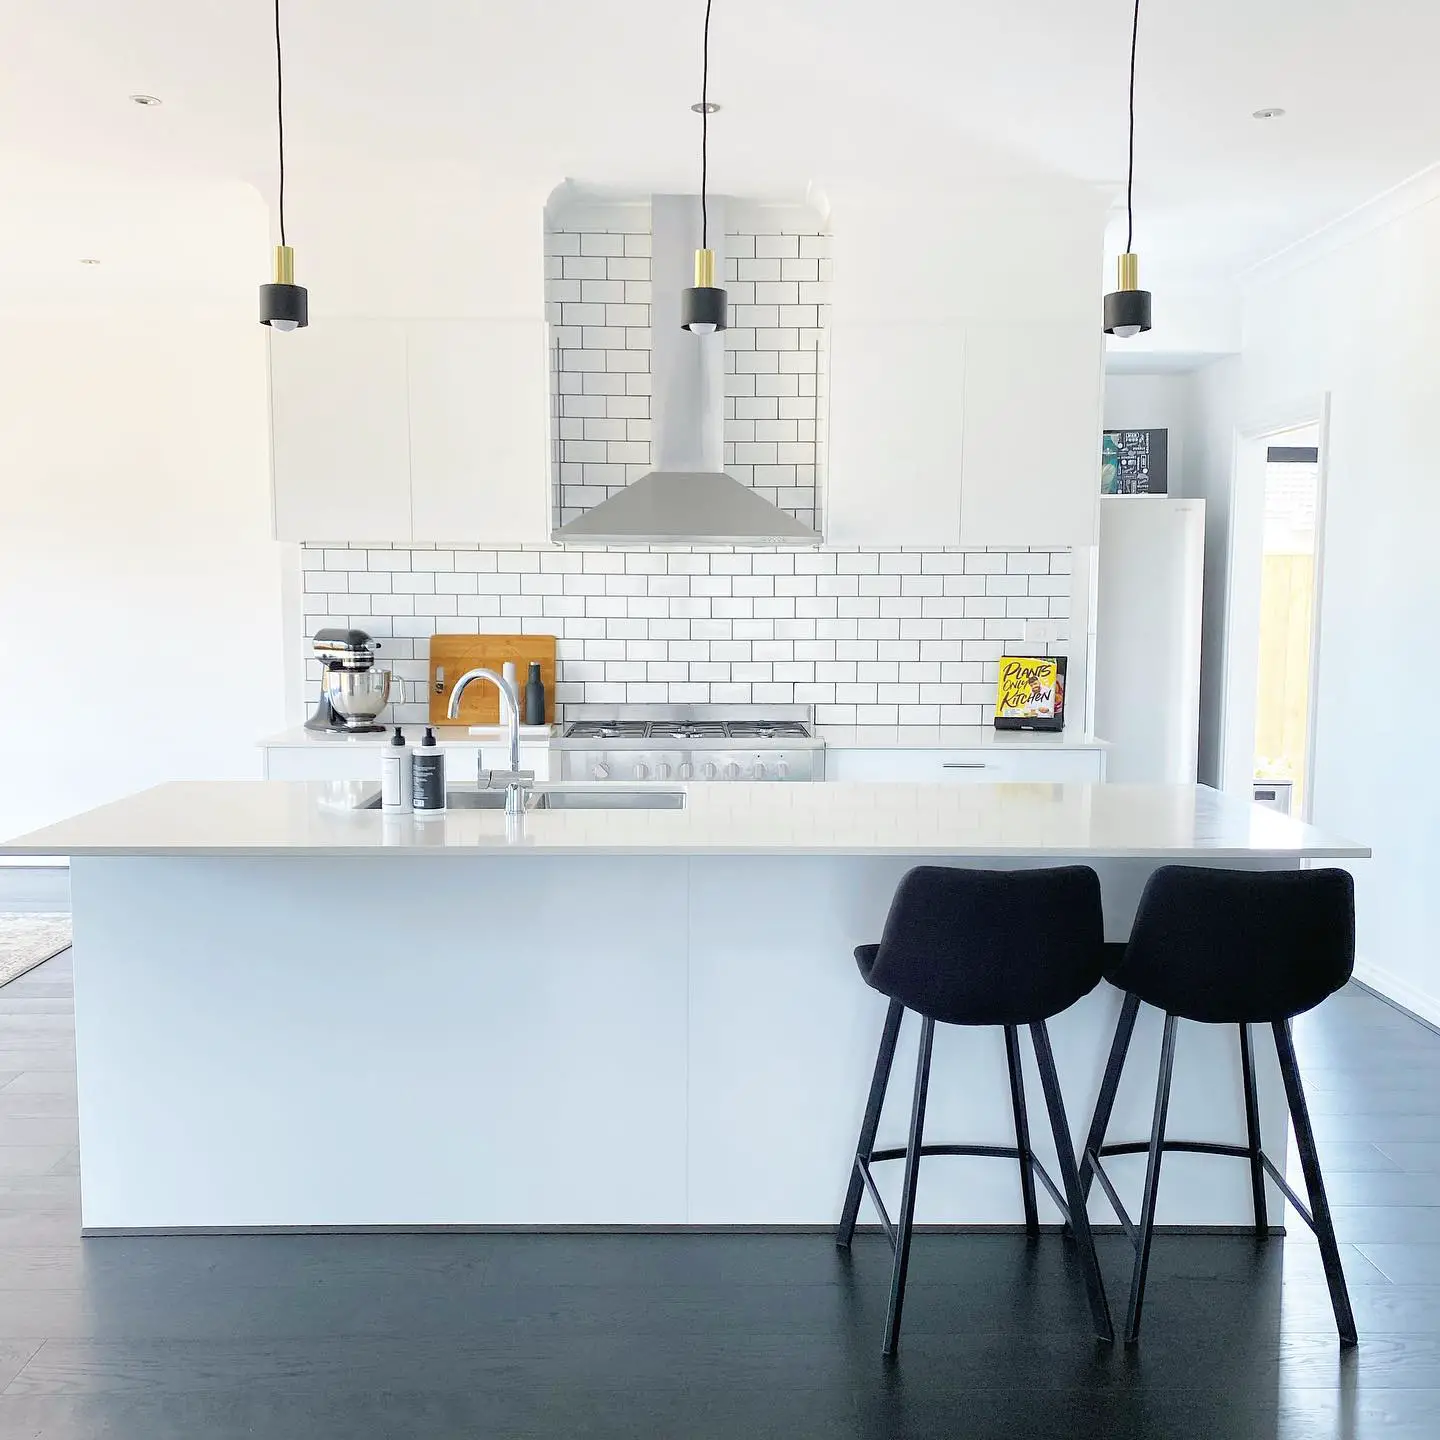 A white kitchen with black counter tops and stools, featuring a black kitchen floor.